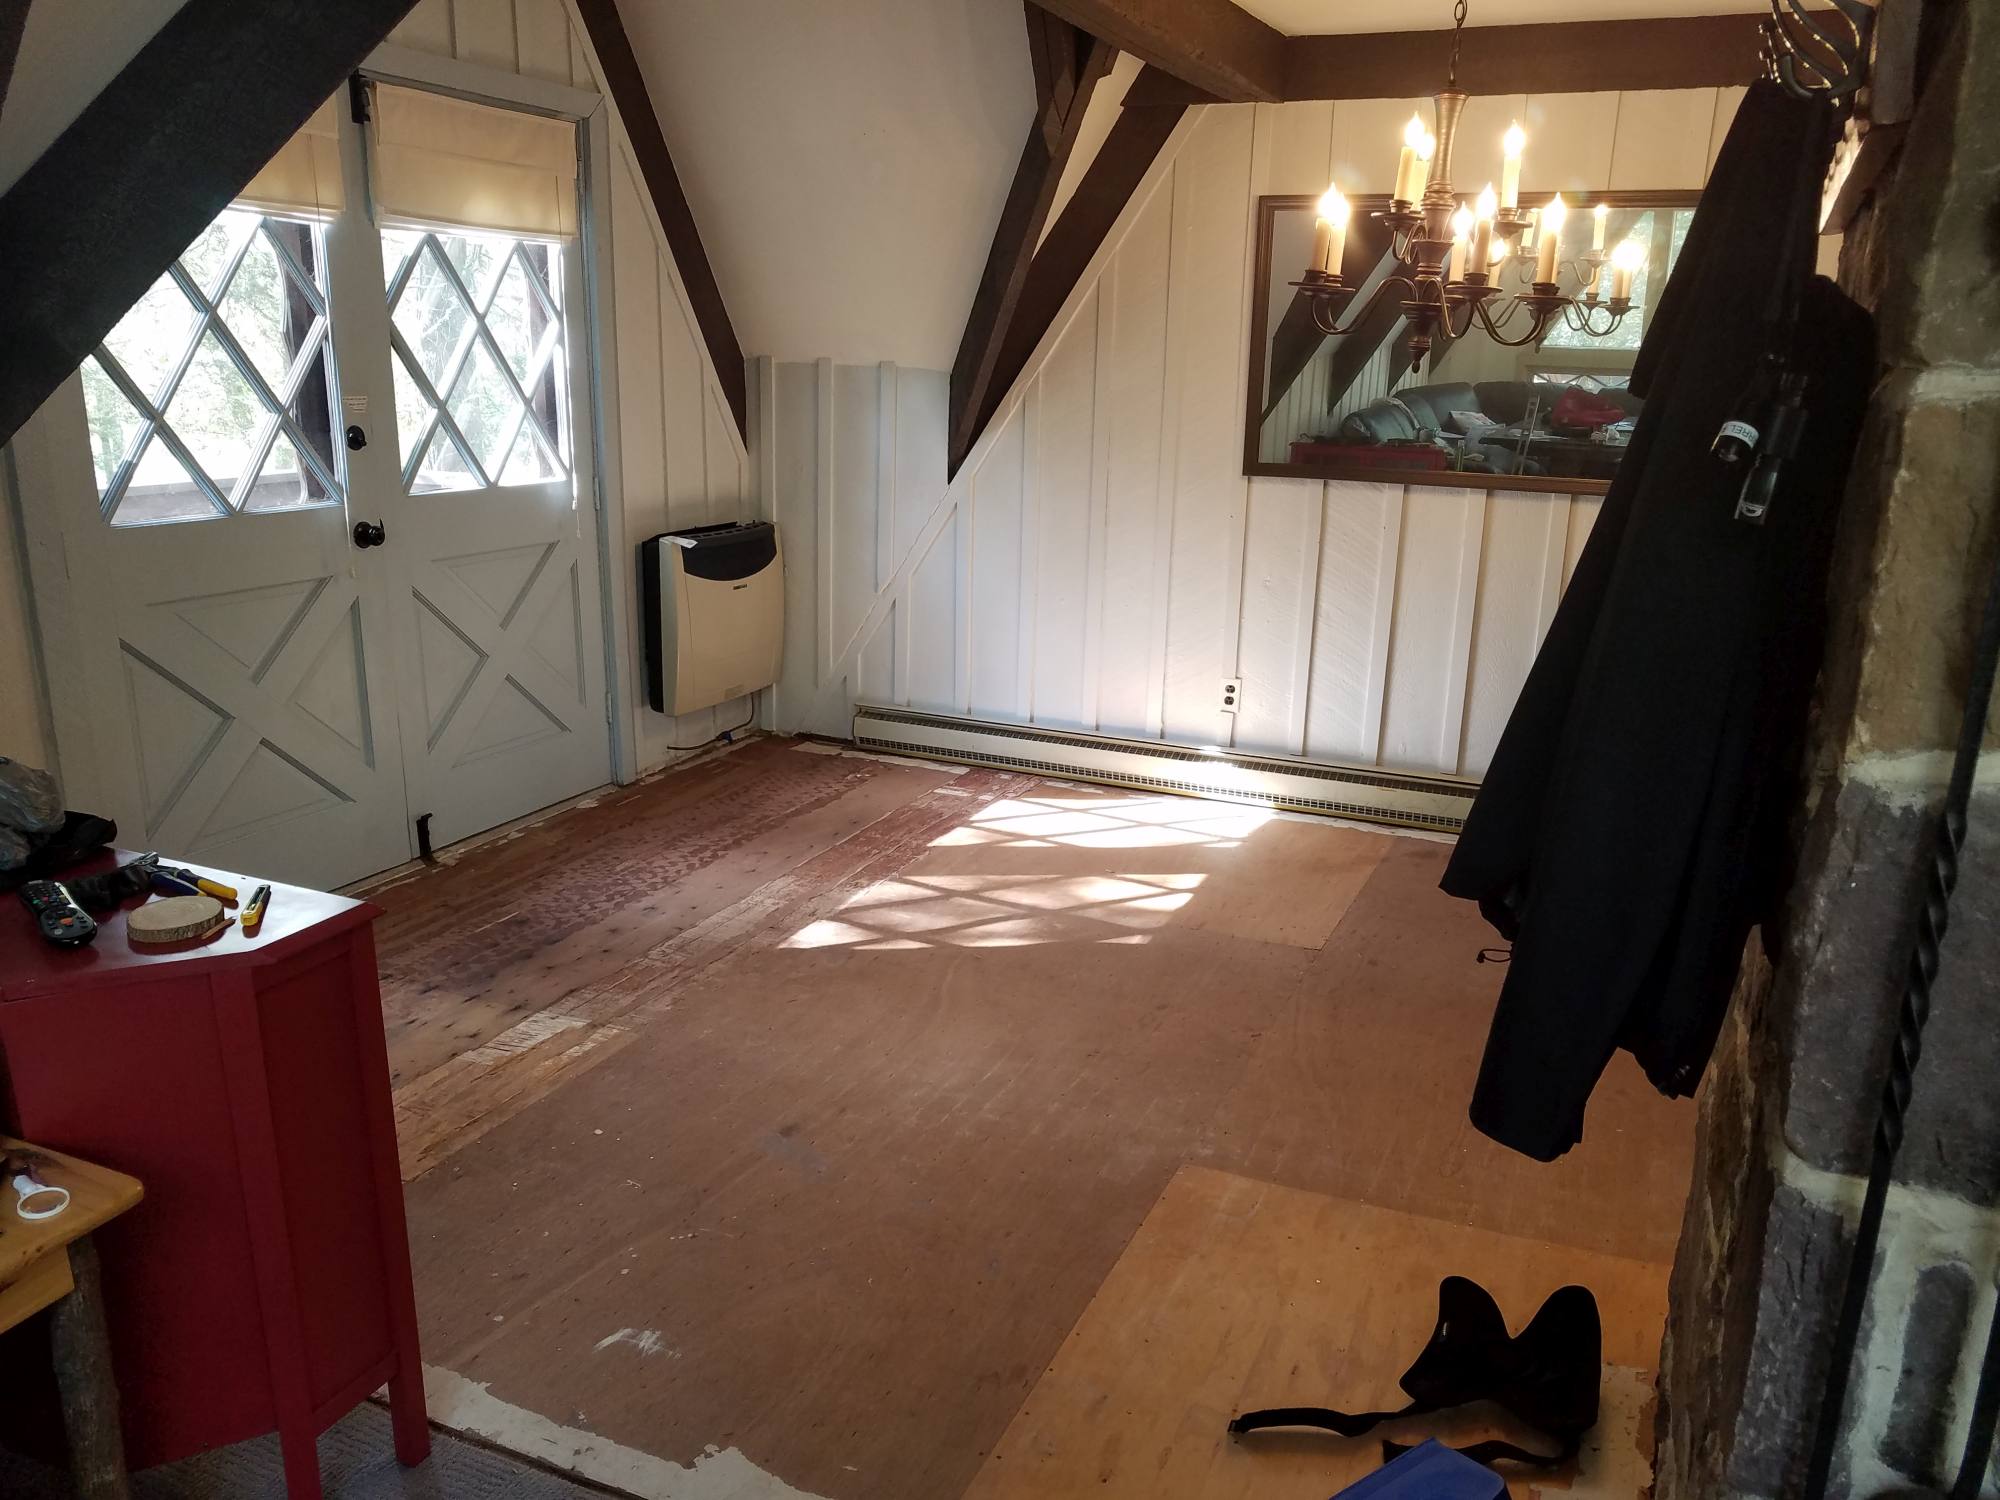 DIY Farmhouse Wide Plank Floor Made From Plywood - The Dining Room Subfloor With Staples Removed